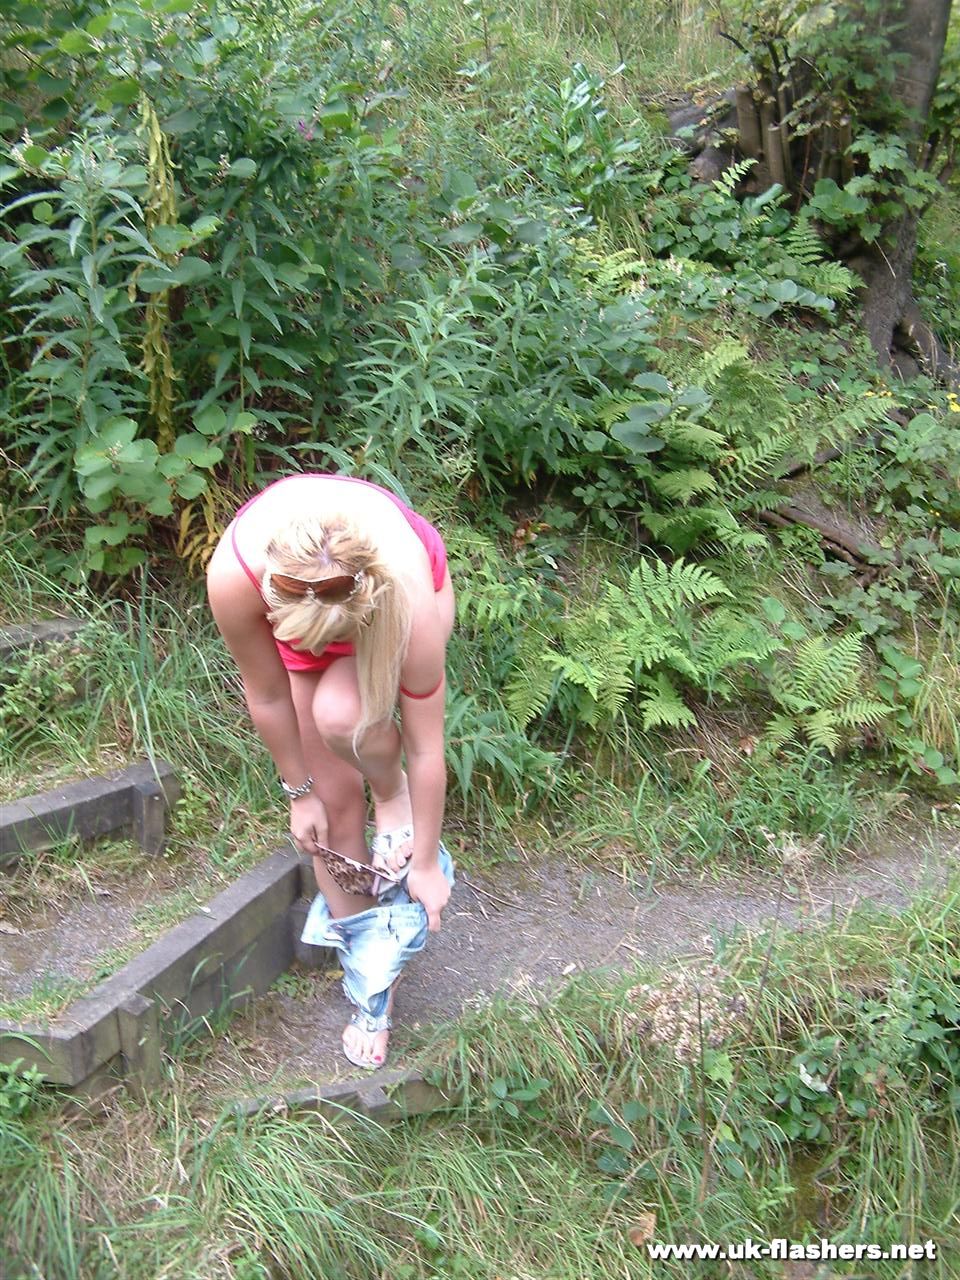 Overweight UK female with blonde hair strips naked on a popular walking trails порно фото #428197329 | UK Flashers Pics, Lena Leigh, Public, мобильное порно